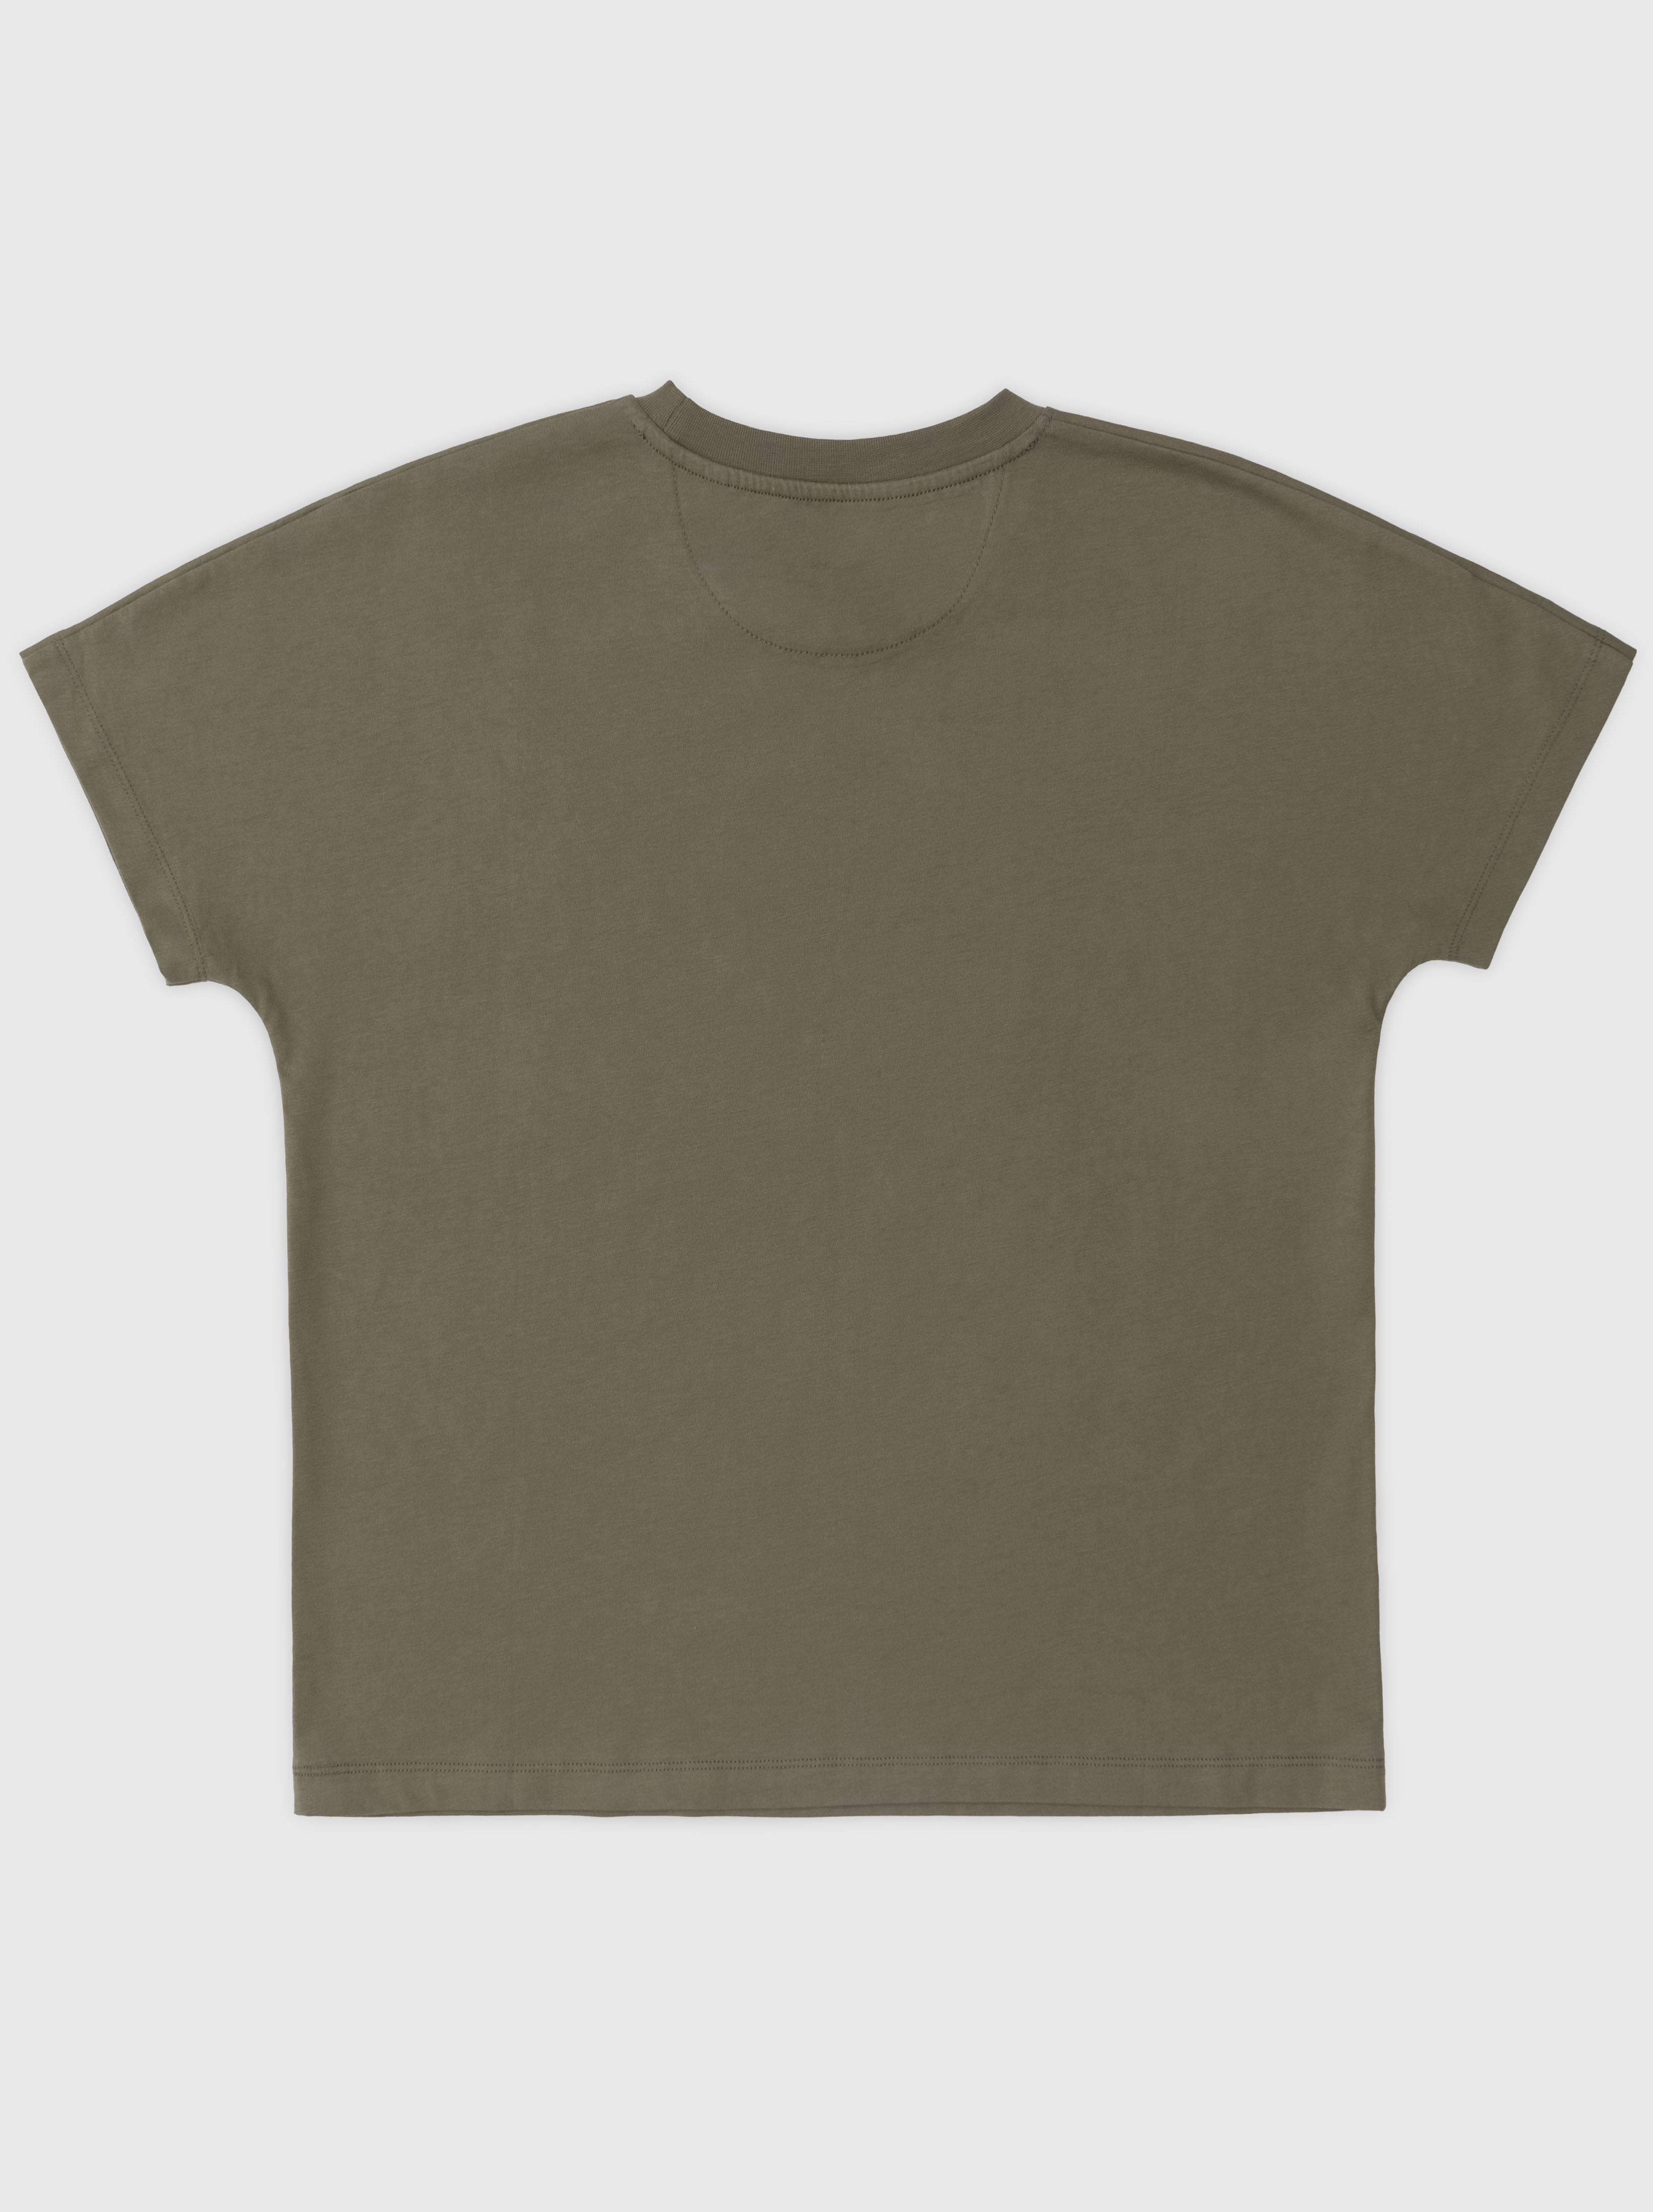 Everyday T-Shirt - Dusty Olive